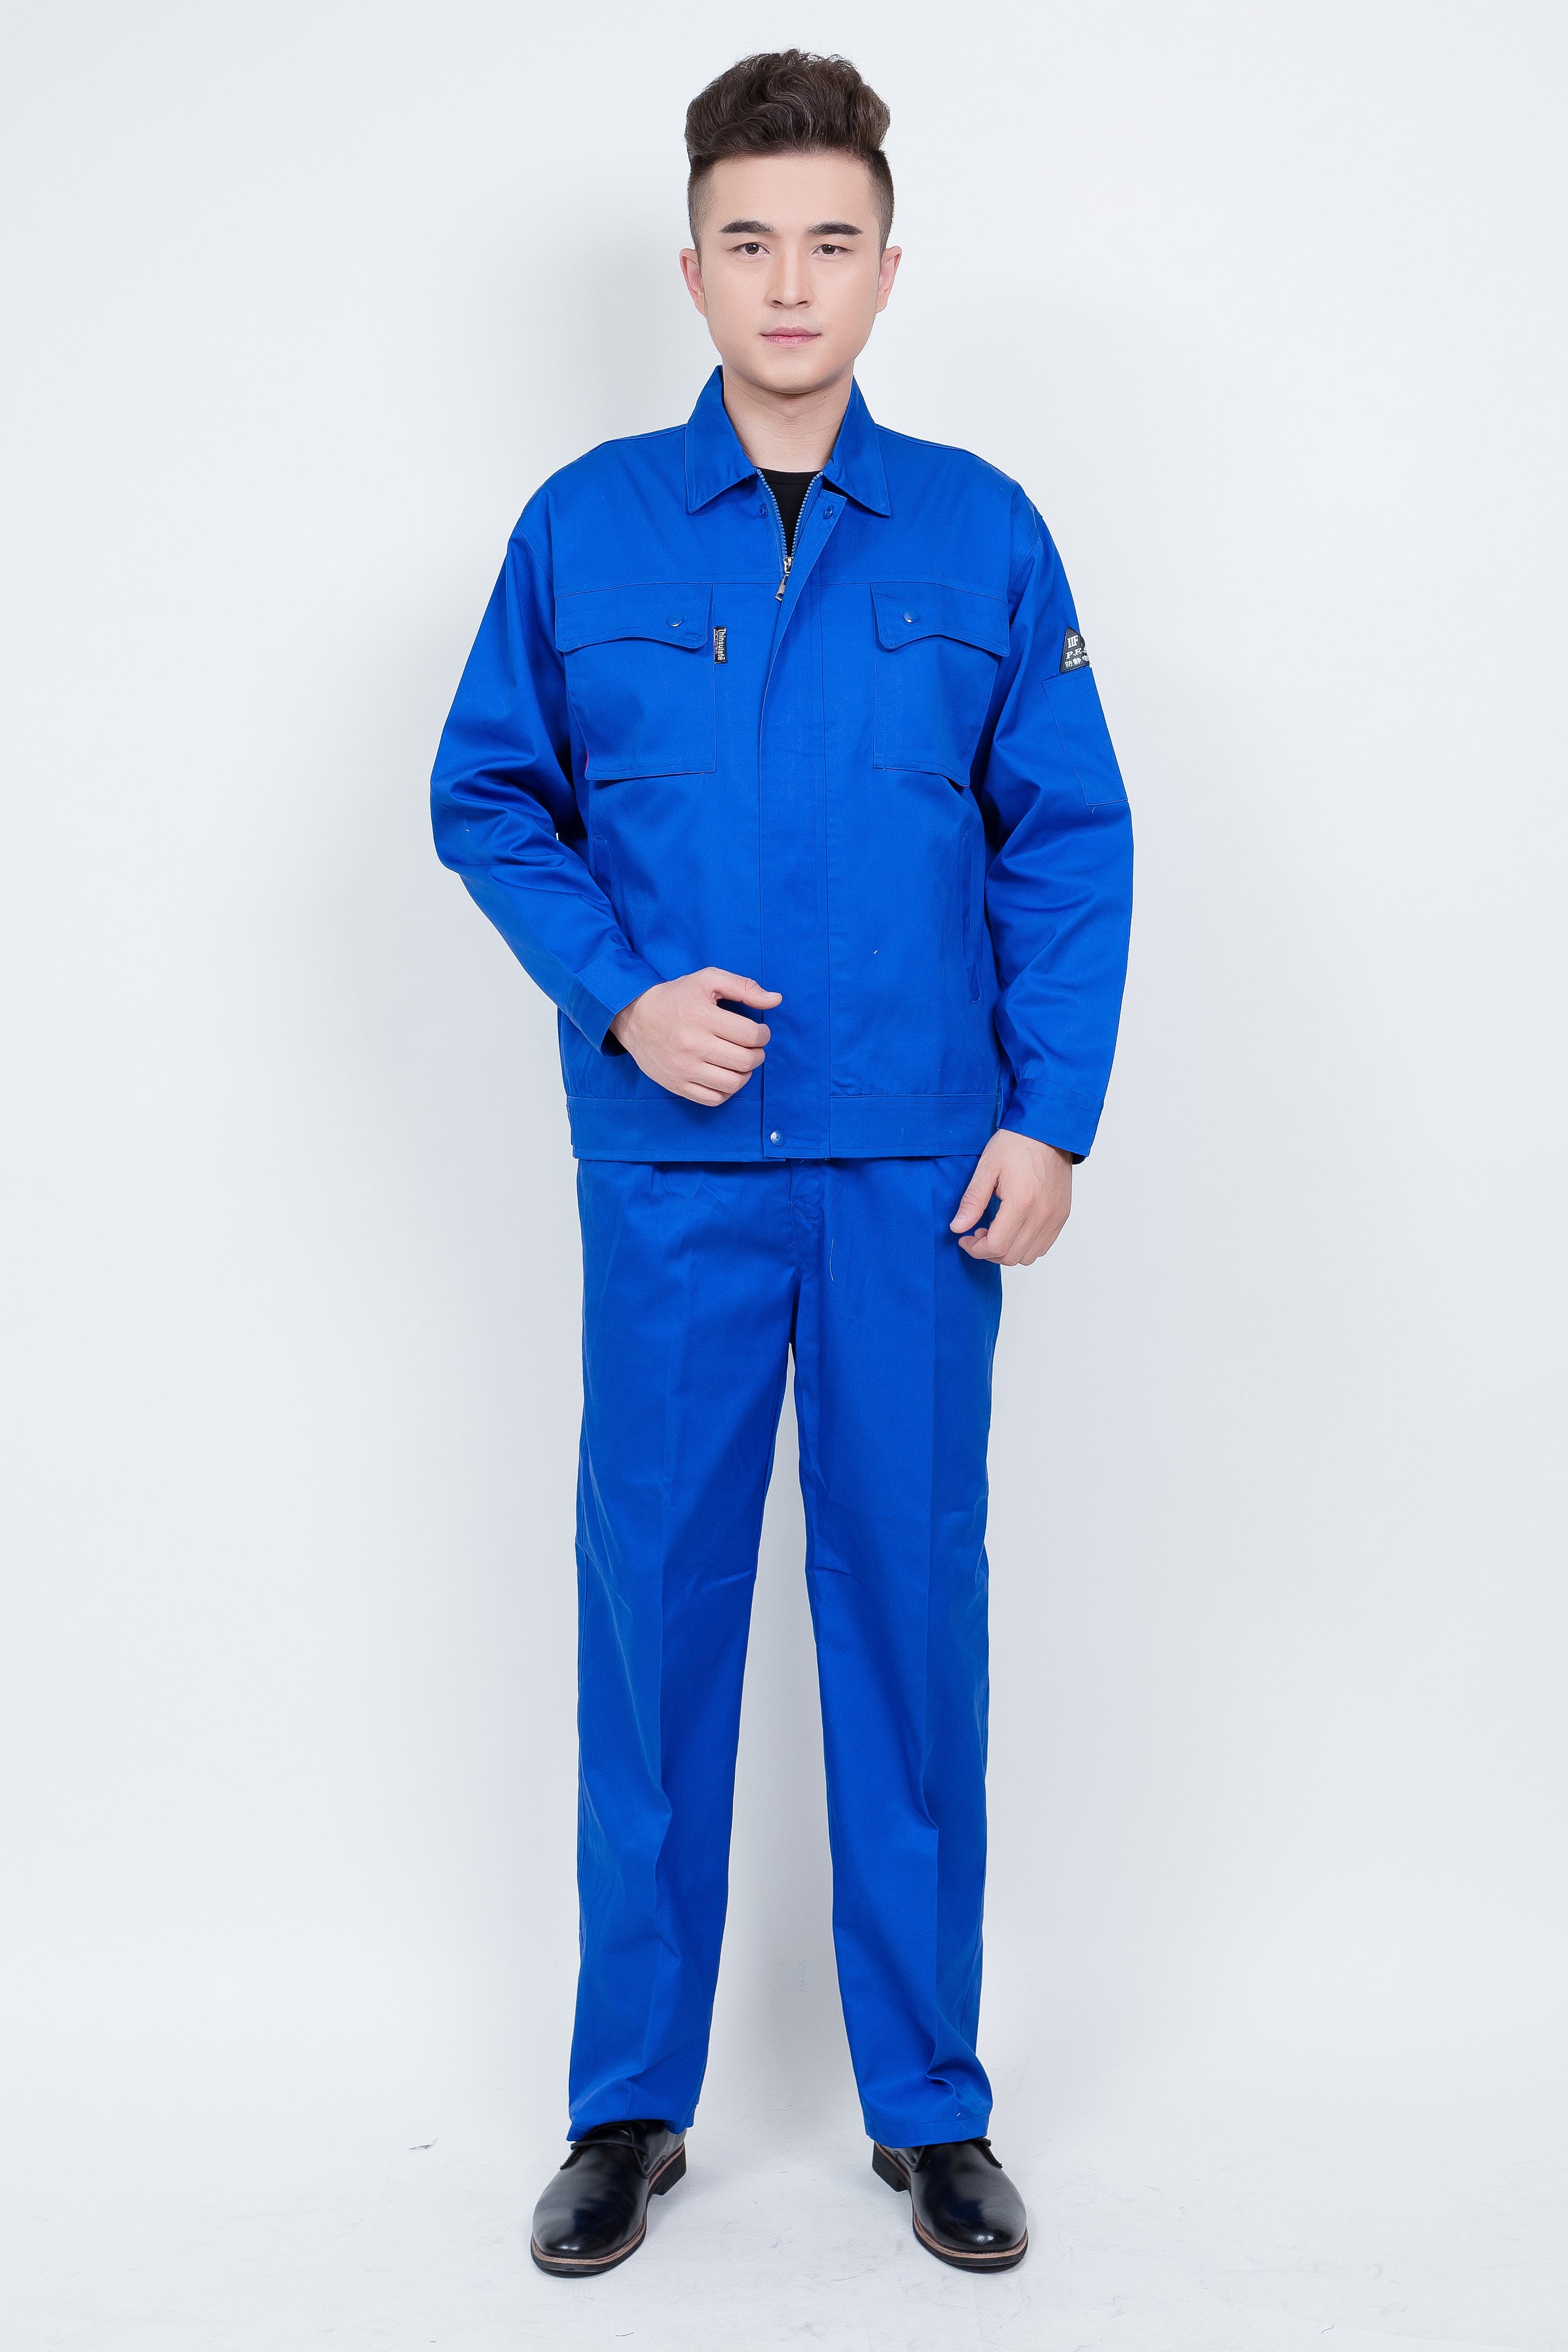 Corals Trading Co. 可樂思百貨商行 纯棉 Spring and Autumn style long-sleeved anti-static work clothes series SD-AS-W702